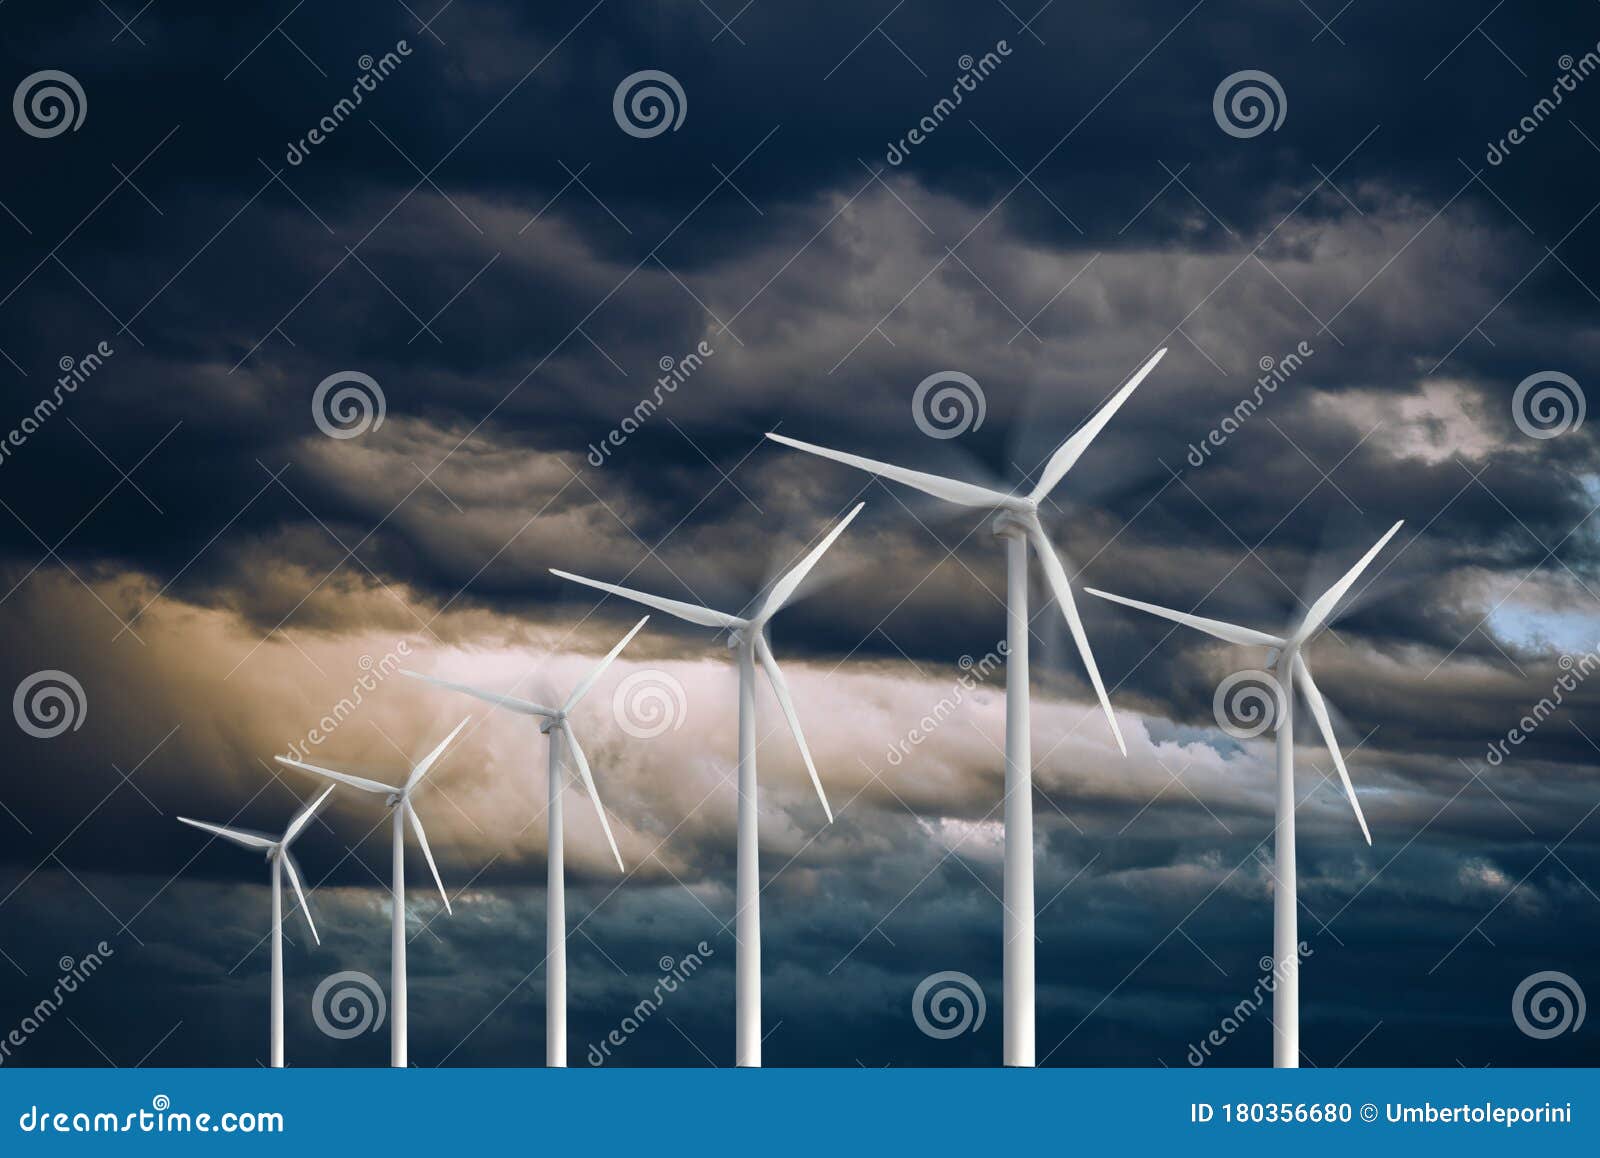 wind turbines power generators on a stormy dramatic sky renewable and sustainable energy concept